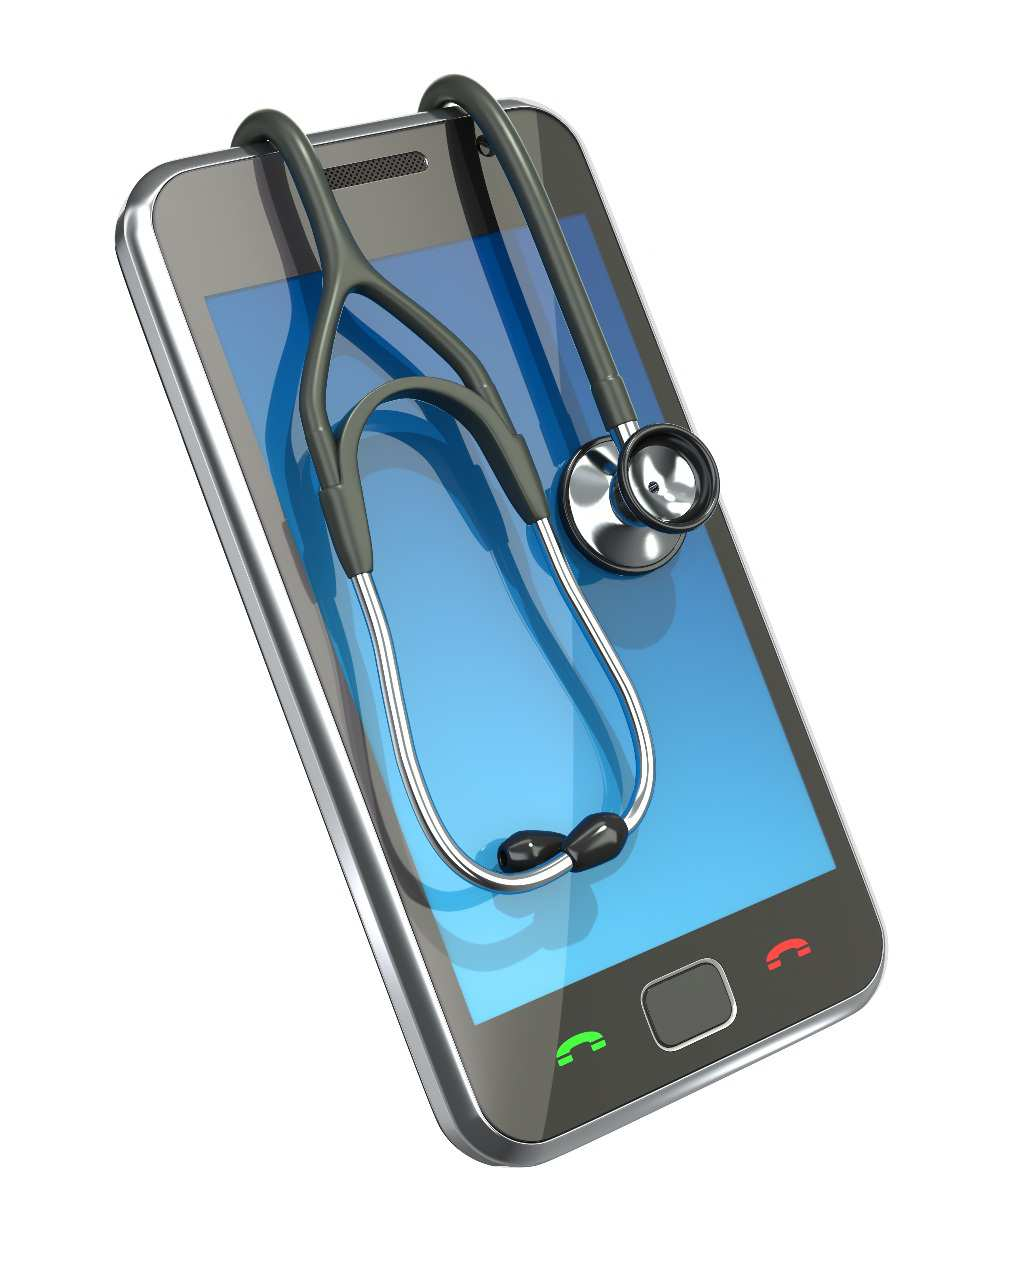 New technologyand services ehealth services are expected to Support the